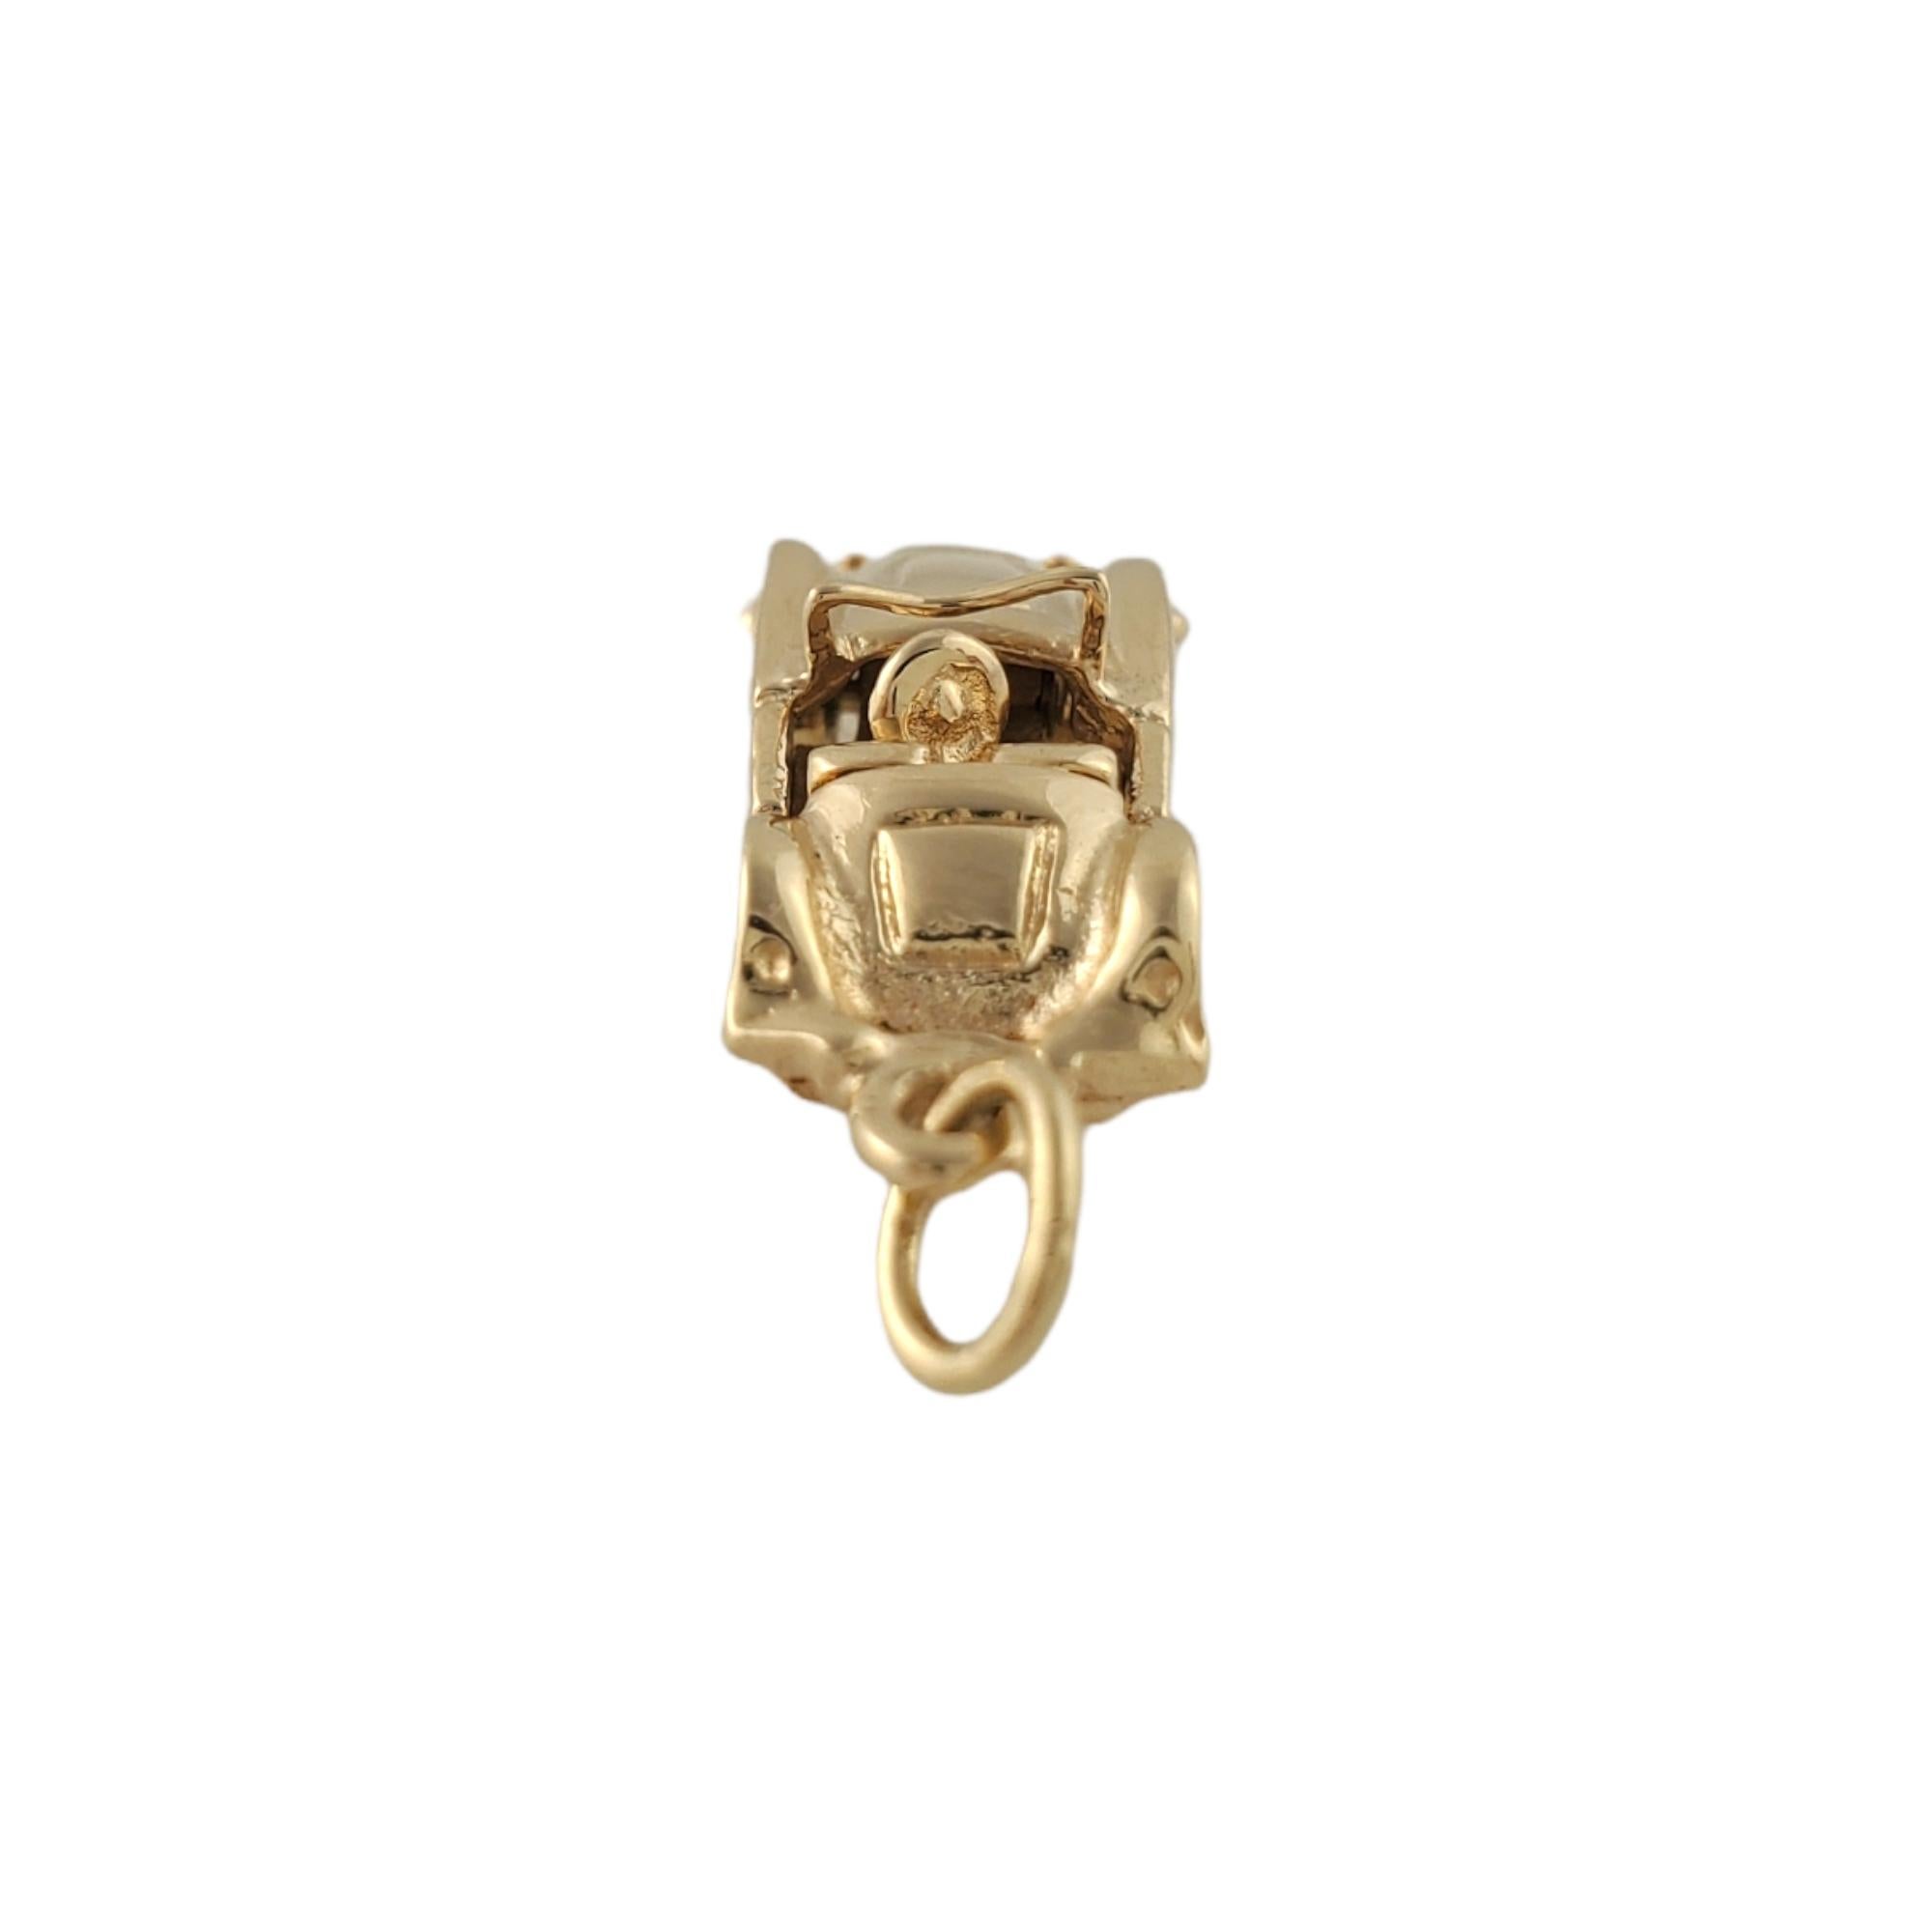 14K Yellow Gold Convertible Car Charm

This lovely convertible car charm features articulating car wheels in 14K yellow gold.

Size: 22 mm X 9 mm

Weight: 3.4 g/ 2.1 dwt

Hallmark: 14K

Very good condition, professionally polished.

Will come